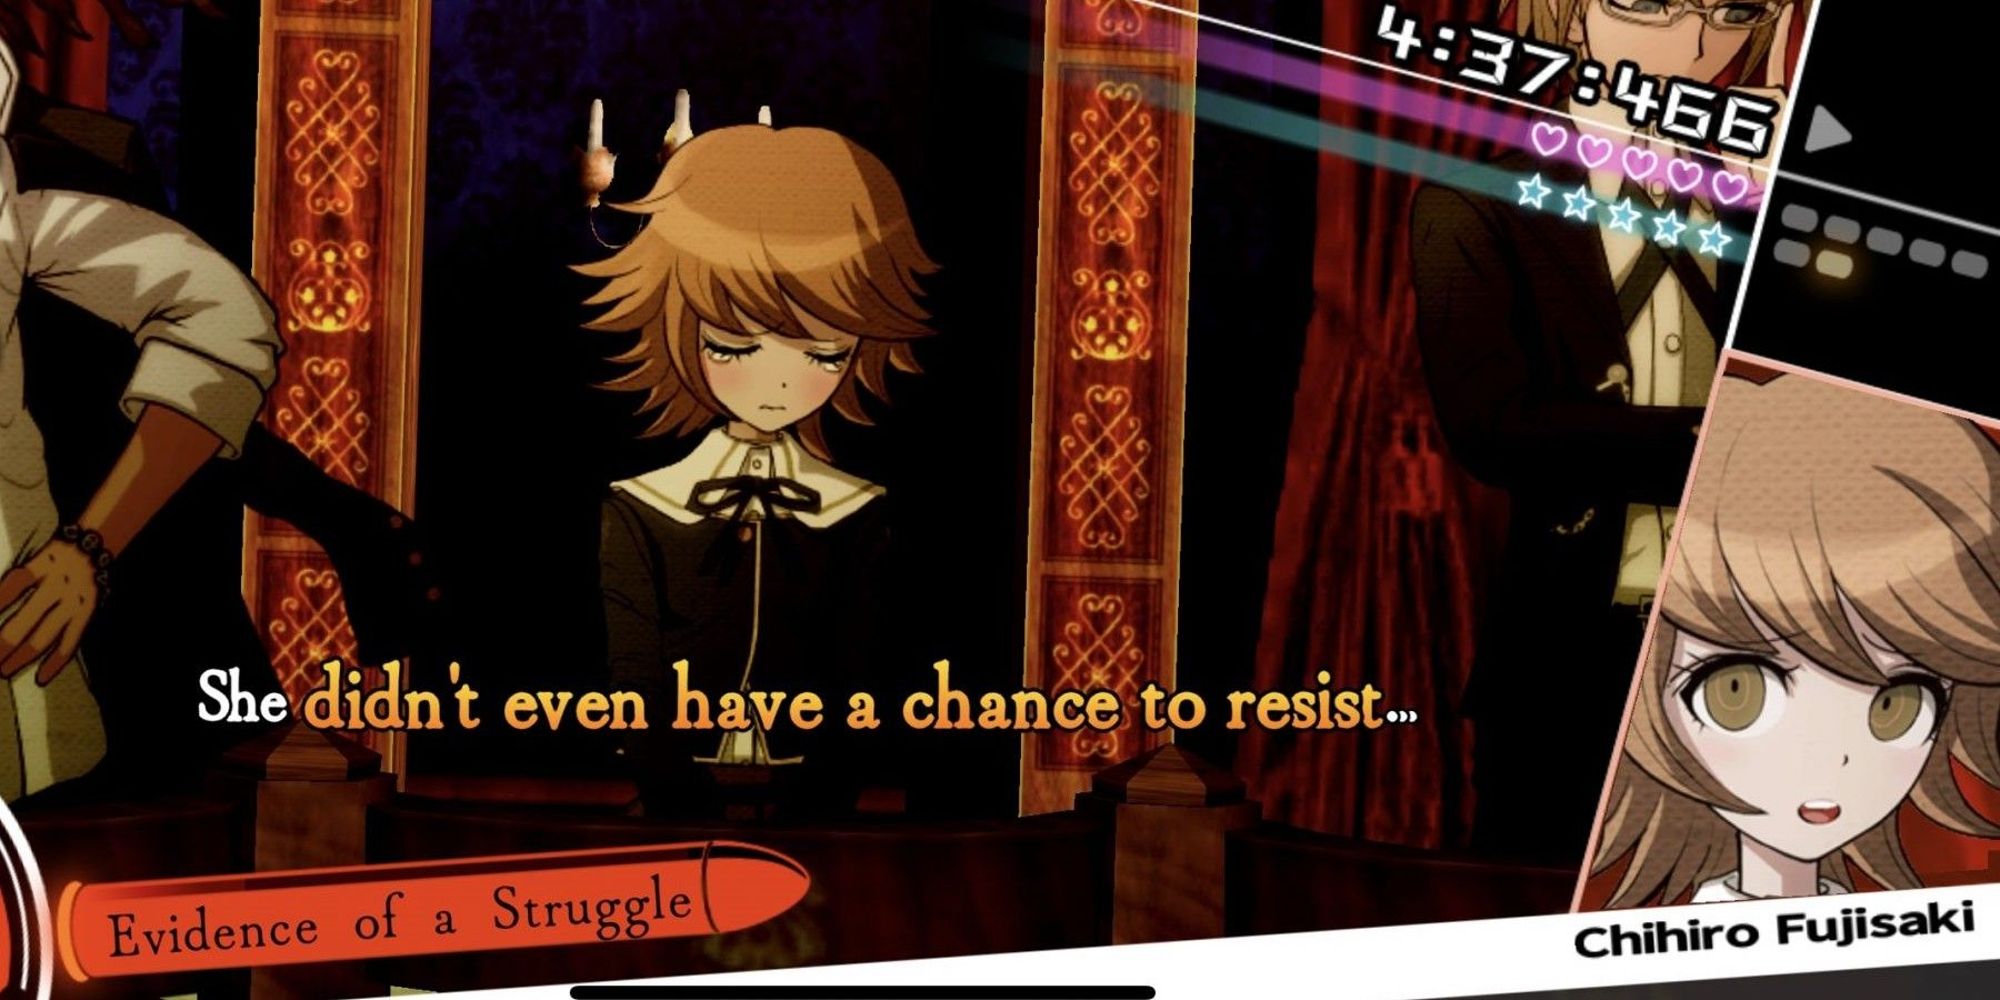 Chihiro laments a victim's experience during a class trial in Danganronpa: Trigger Happy Havoc.